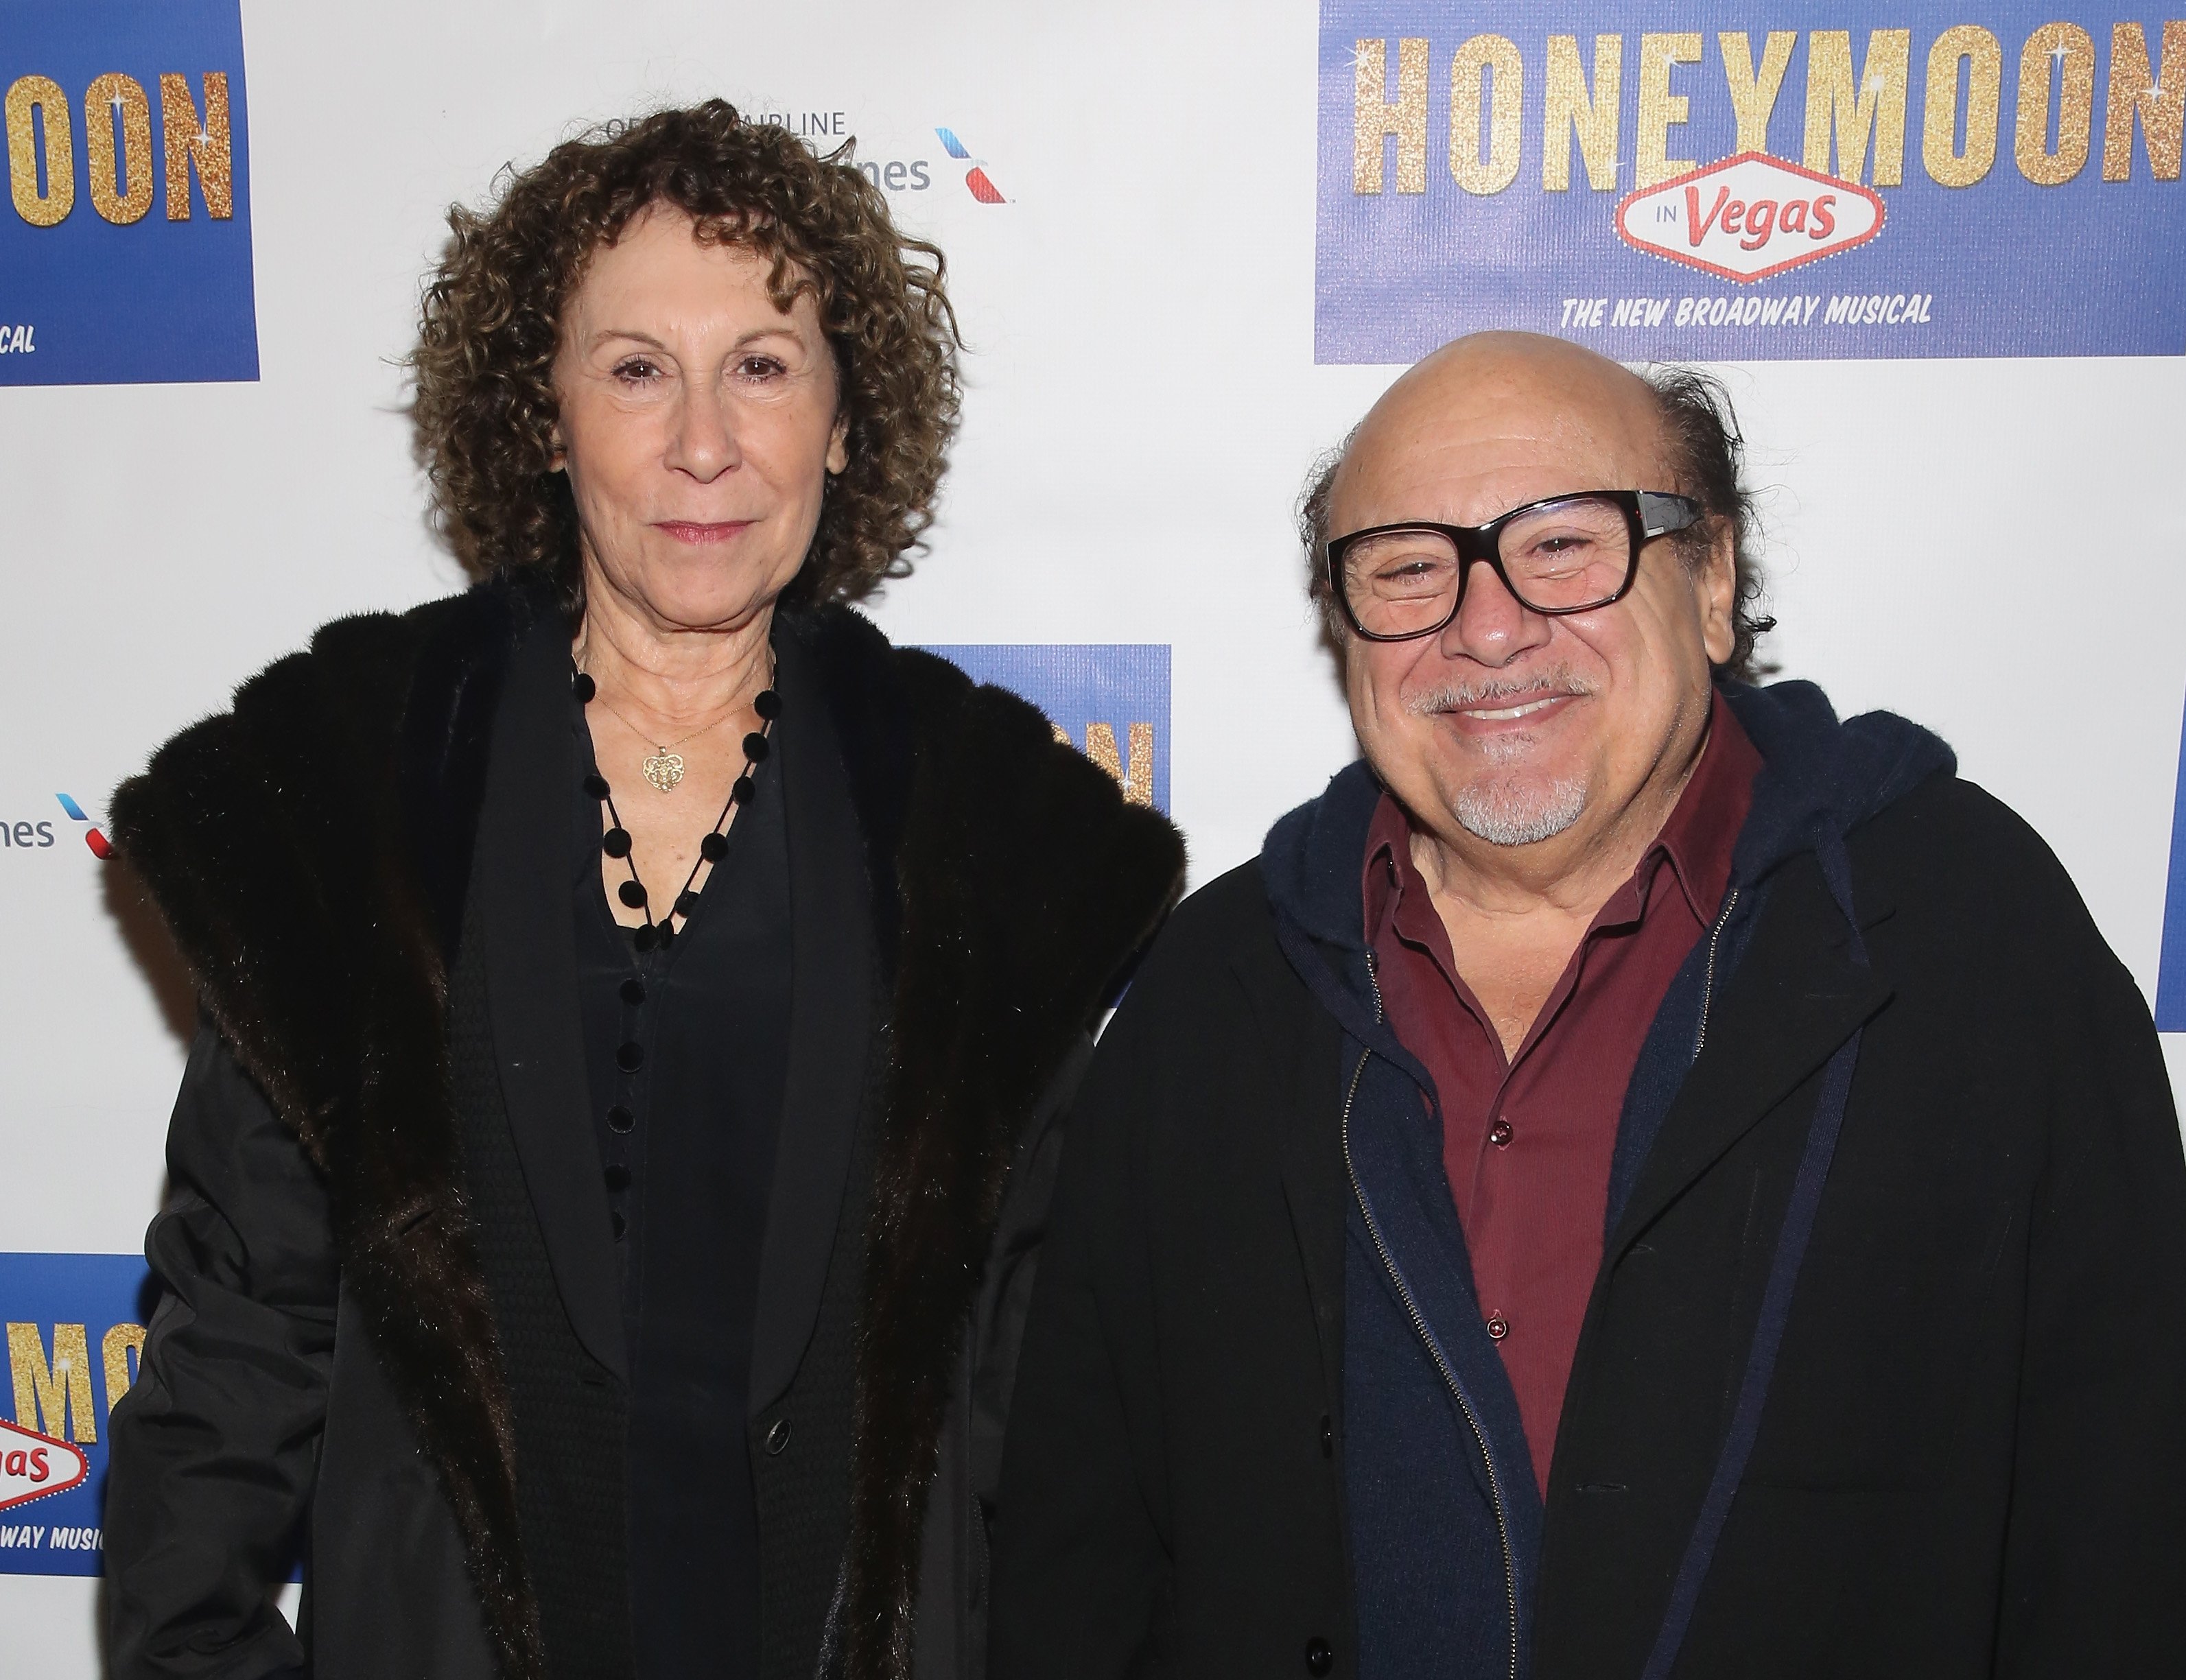 Rhea Pearlman and Danny DeVito attends "Honeymoon In Vegas" Broadway Opening Night at Nederlander Theatre on January 15, 2015 | Photo: GettyImages